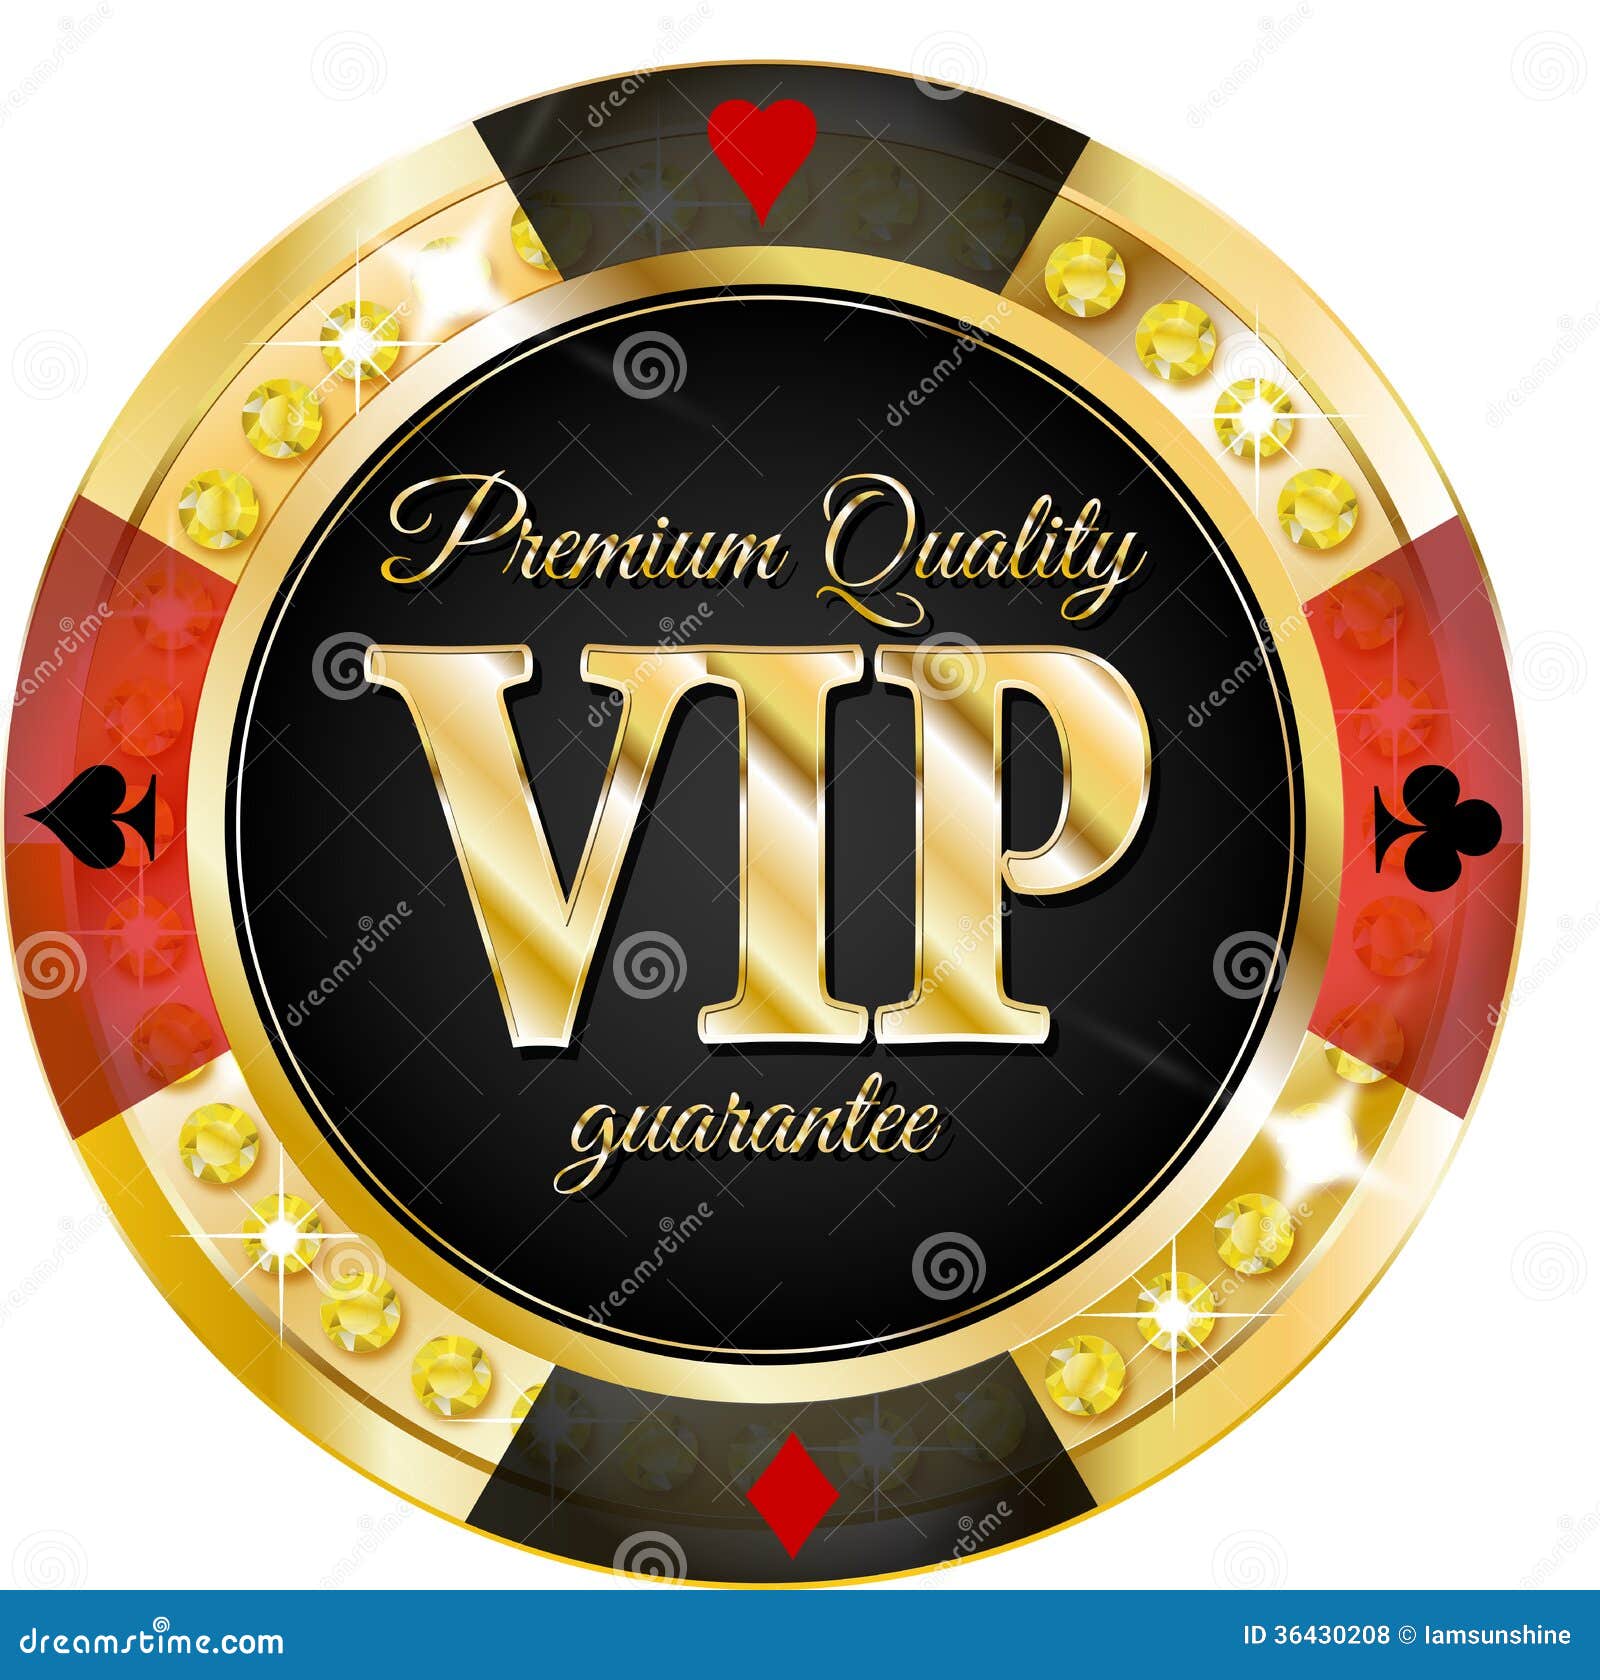 vip casinos Reviewed: What Can One Learn From Other's Mistakes